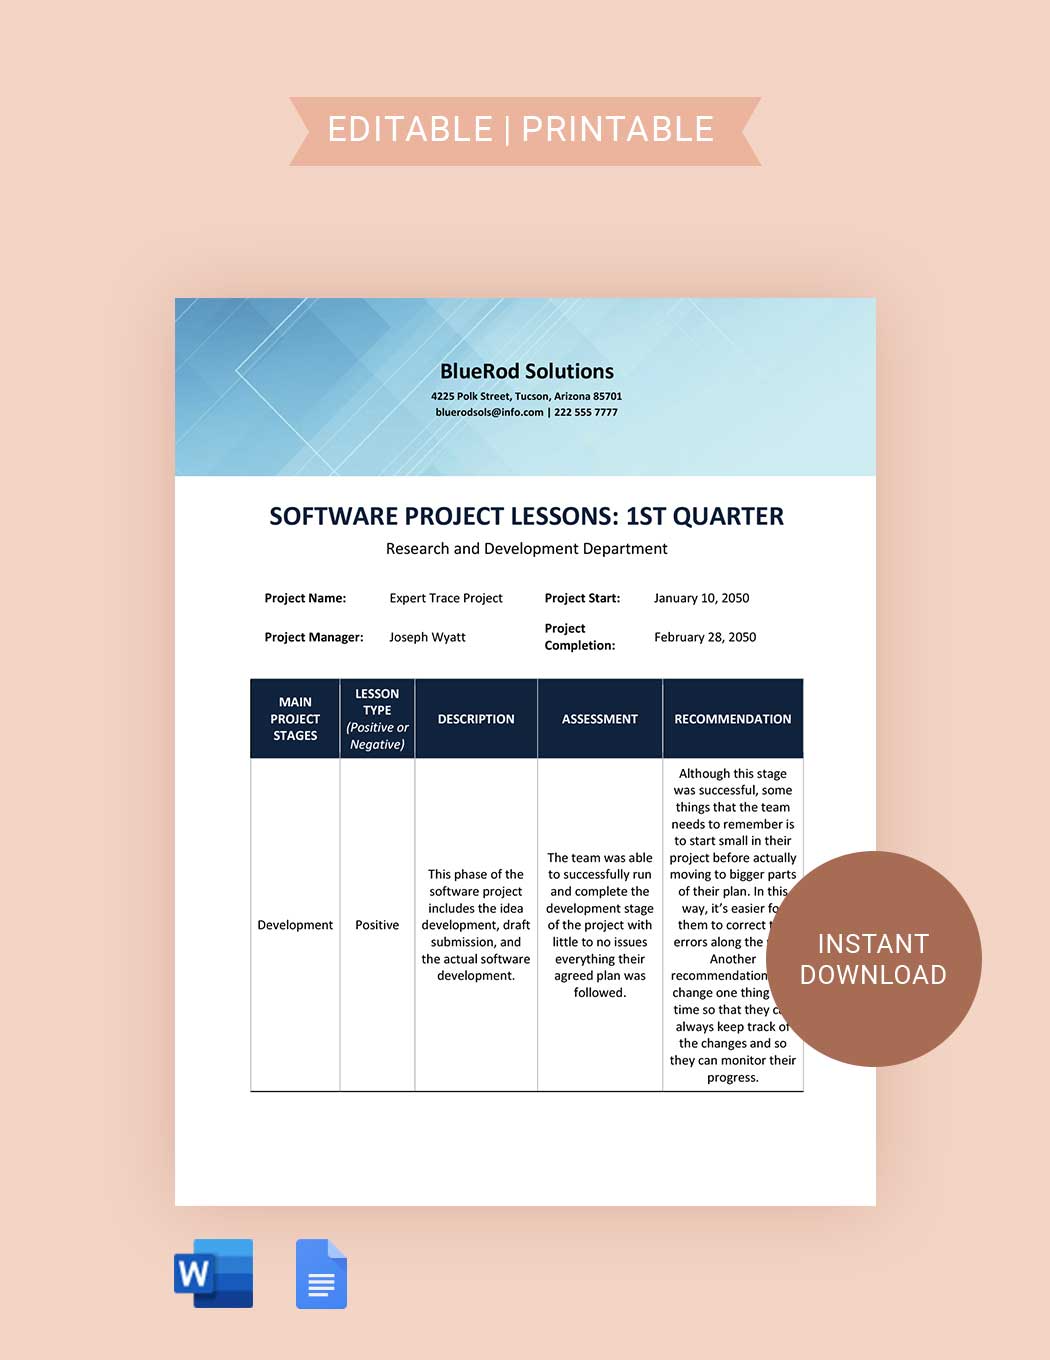 Software Project Lessons Learned Template in Word, Google Docs